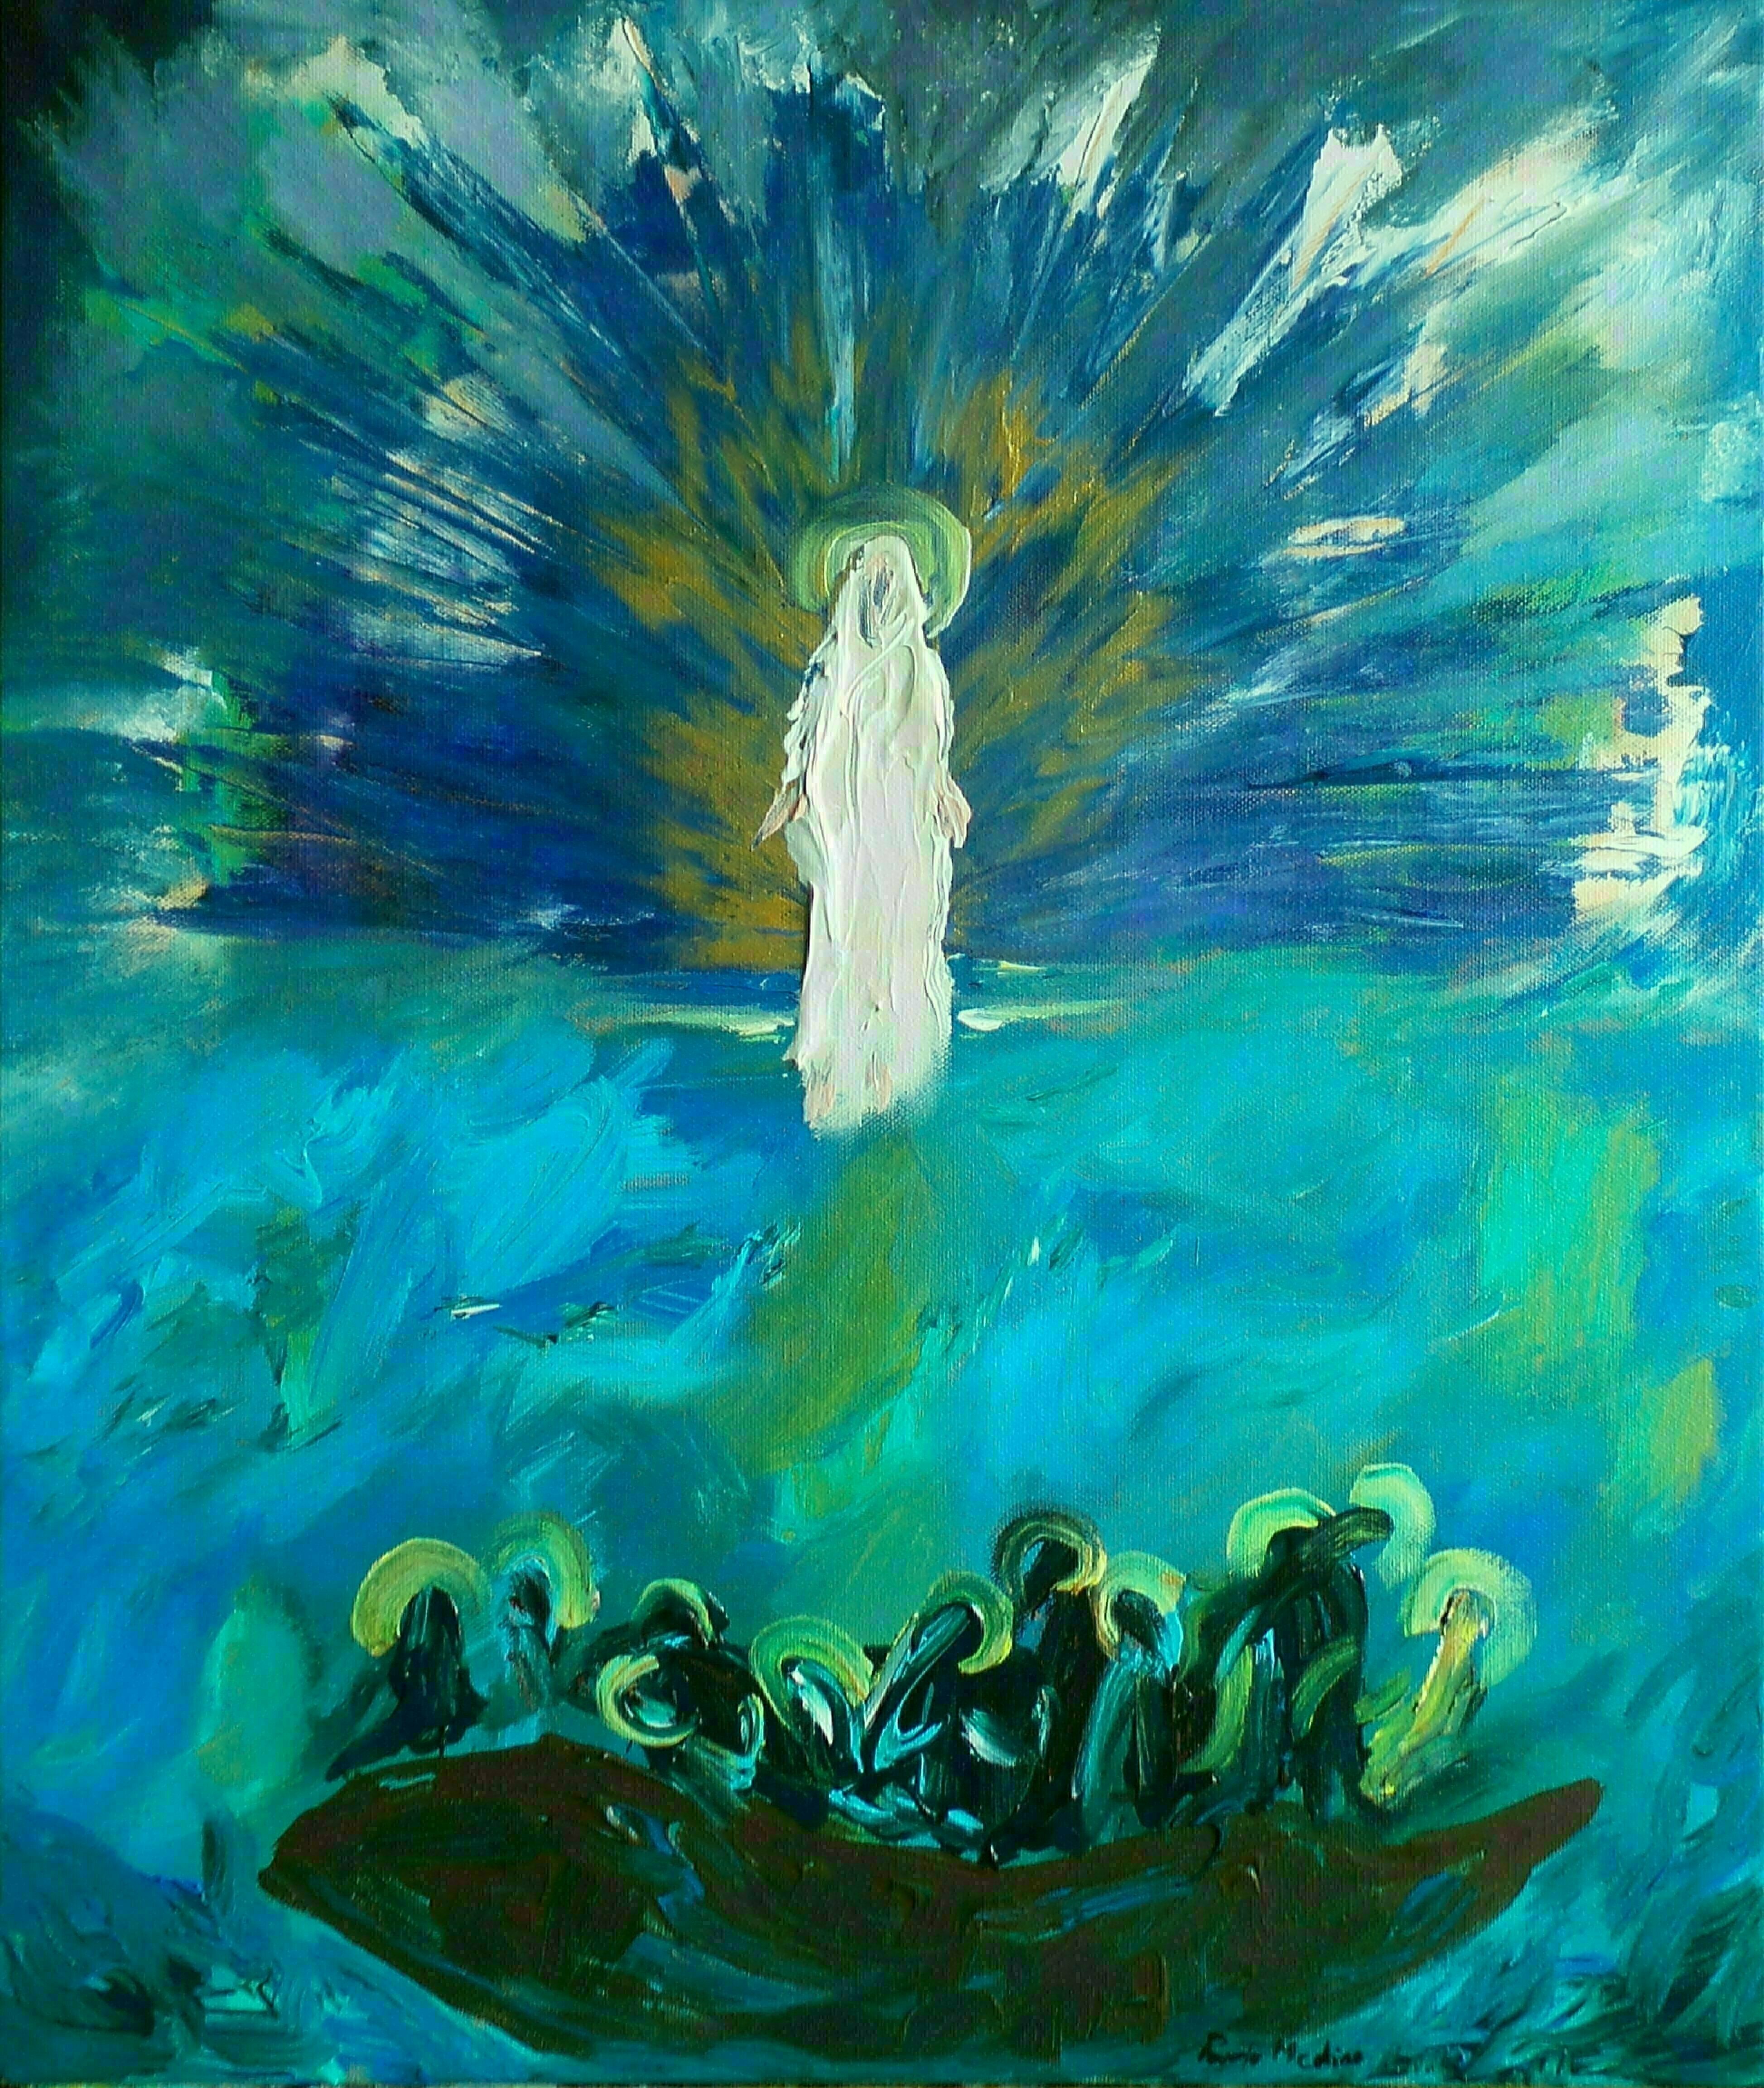 Paulo Medina, 'Fearful Apostles', 2021, original Painting Acrylic, 50 x 60  cm. Artwork description: 2448 And they seeing him walking upon the sea, were troubled, saying It is an apparition.  And they cried out for fear.  Mt 14, 26...